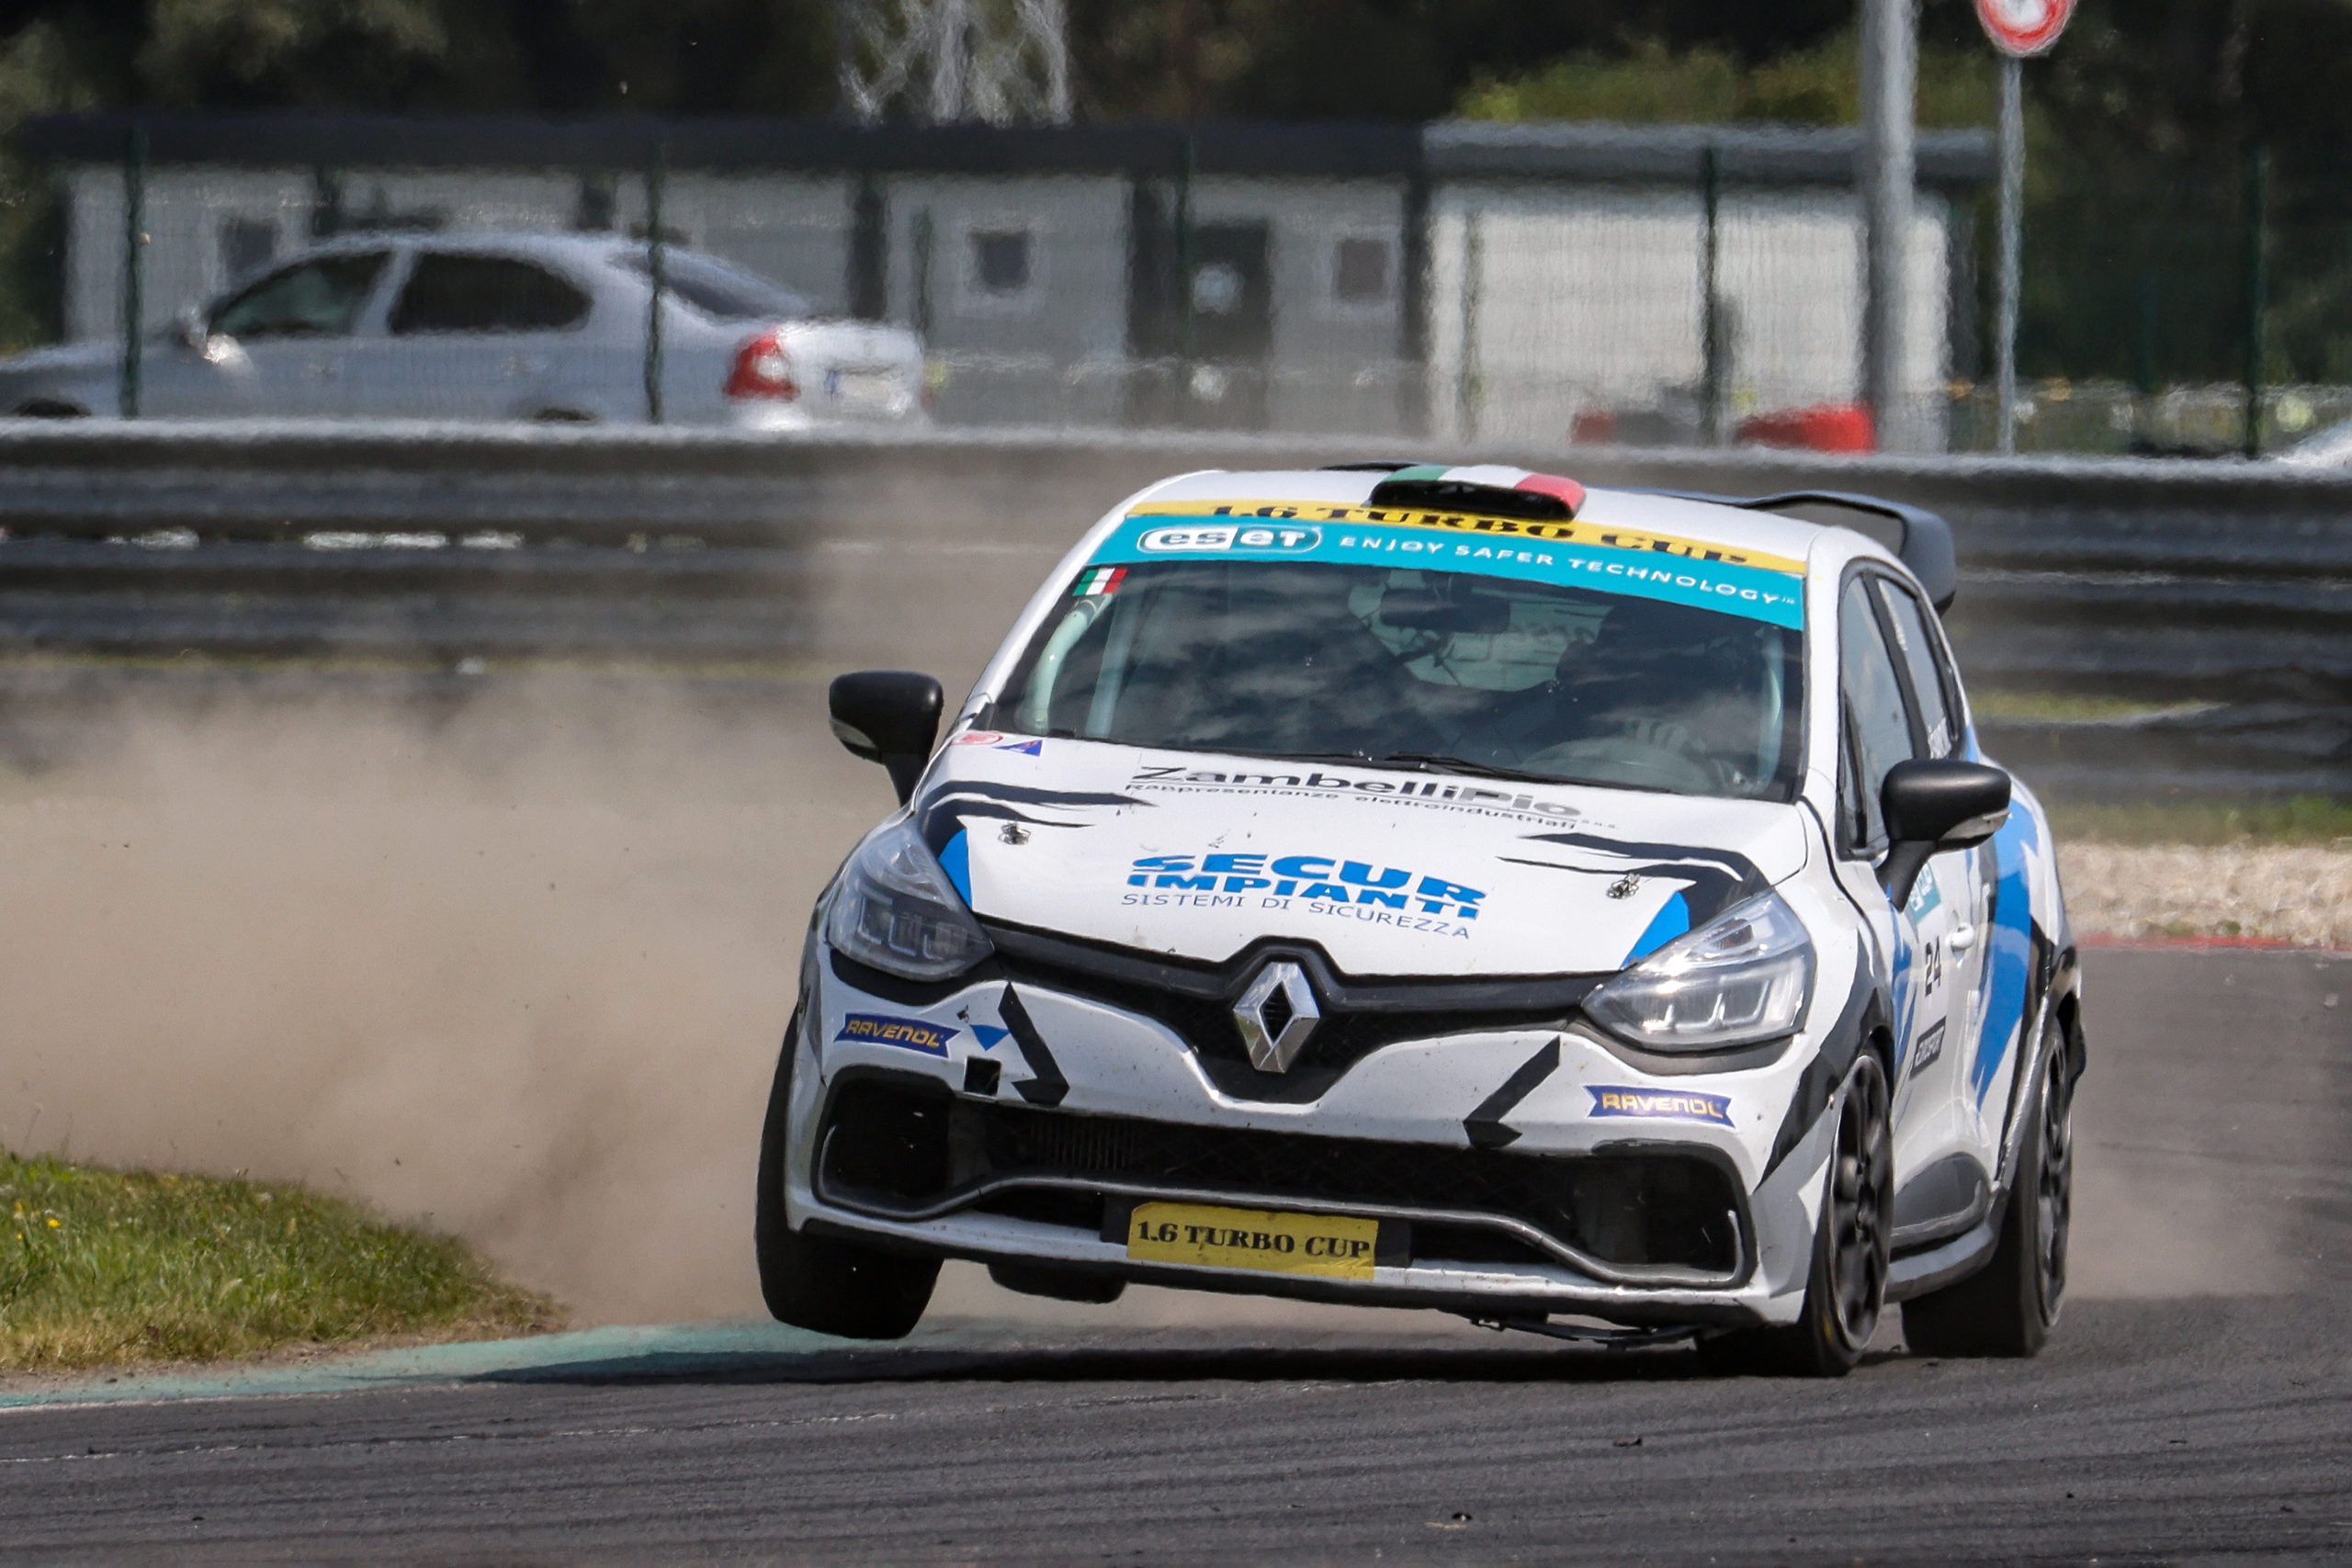 The Clio Cup is an ideal place for beginners and a chance to enter the higher categories